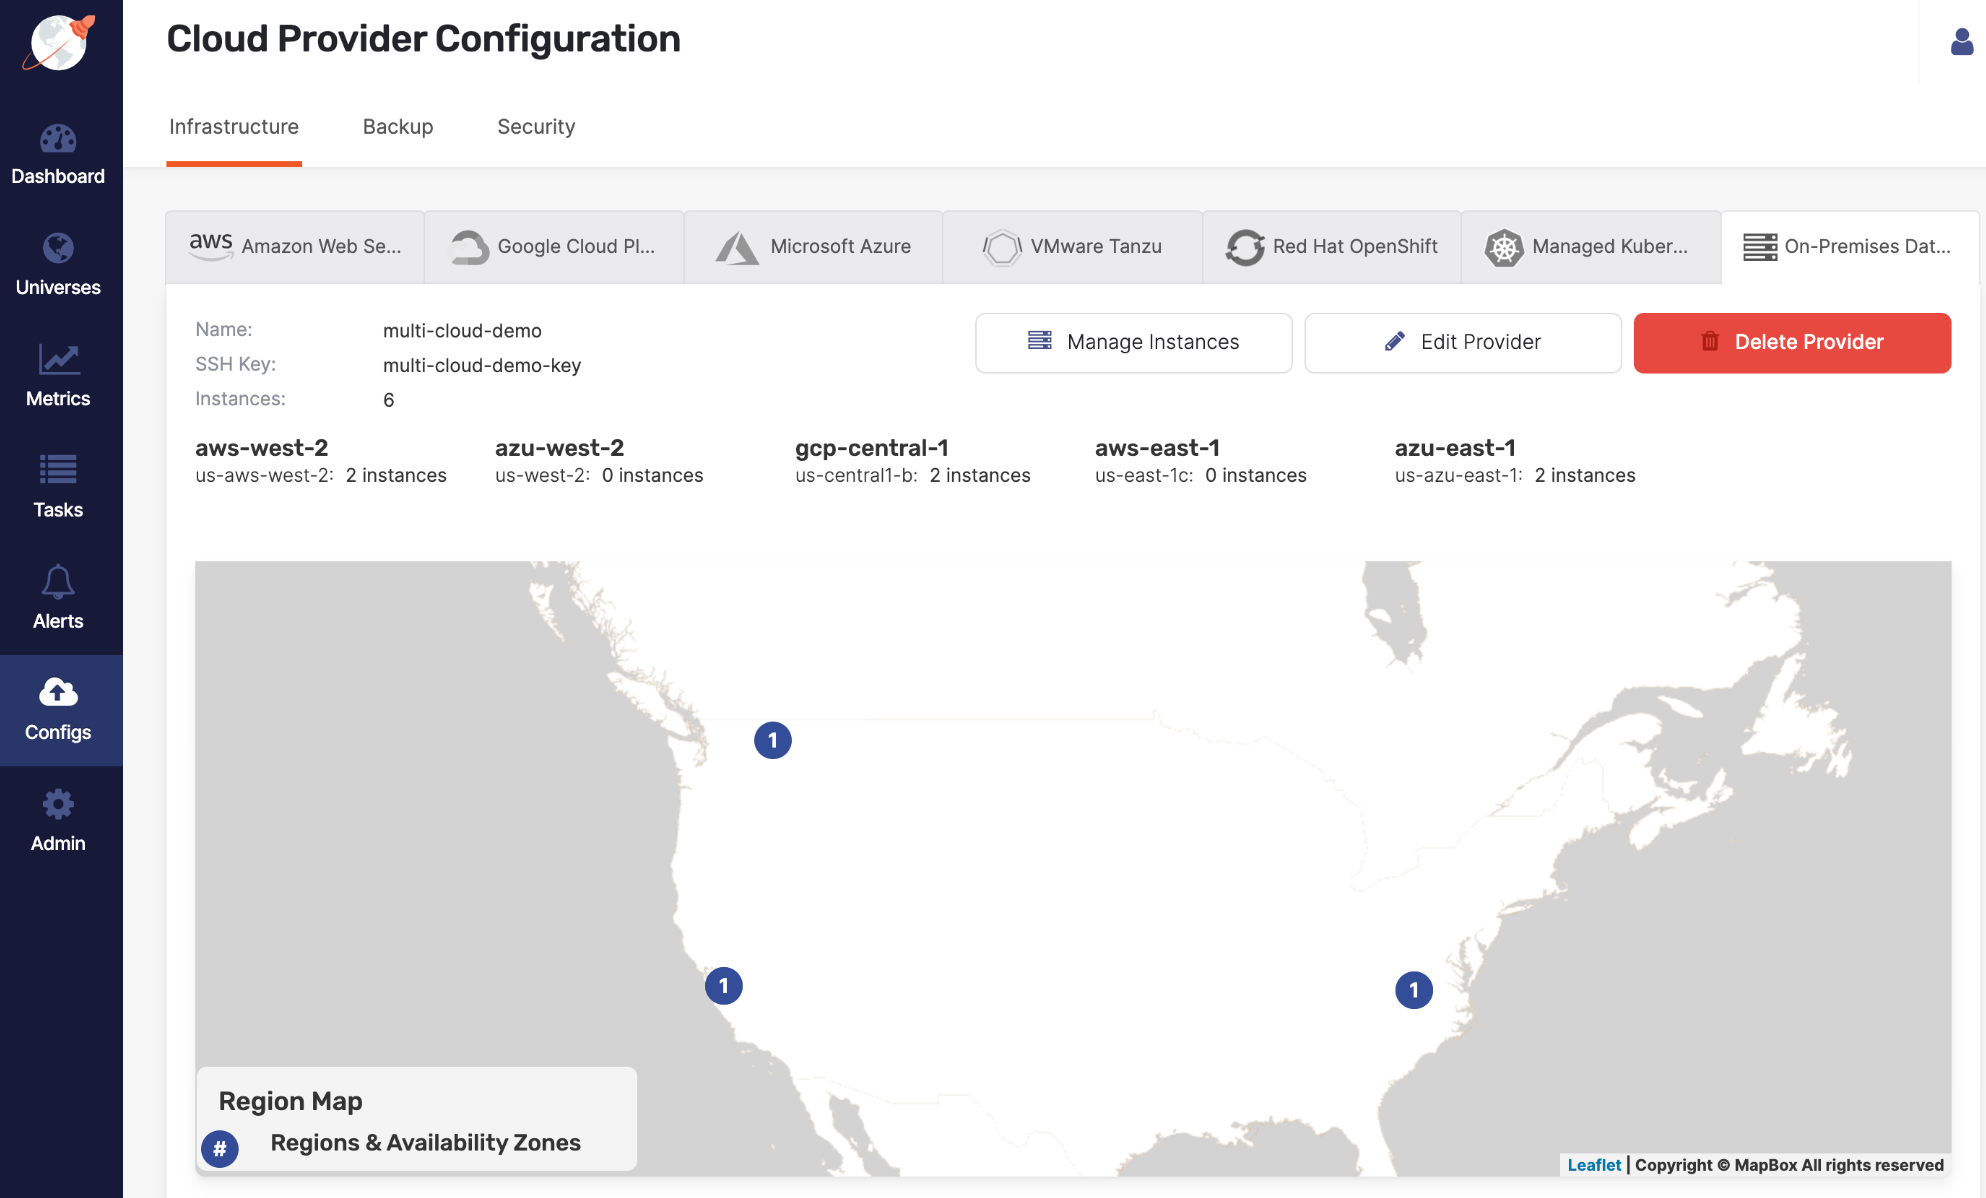 Multi-cloud provider map view